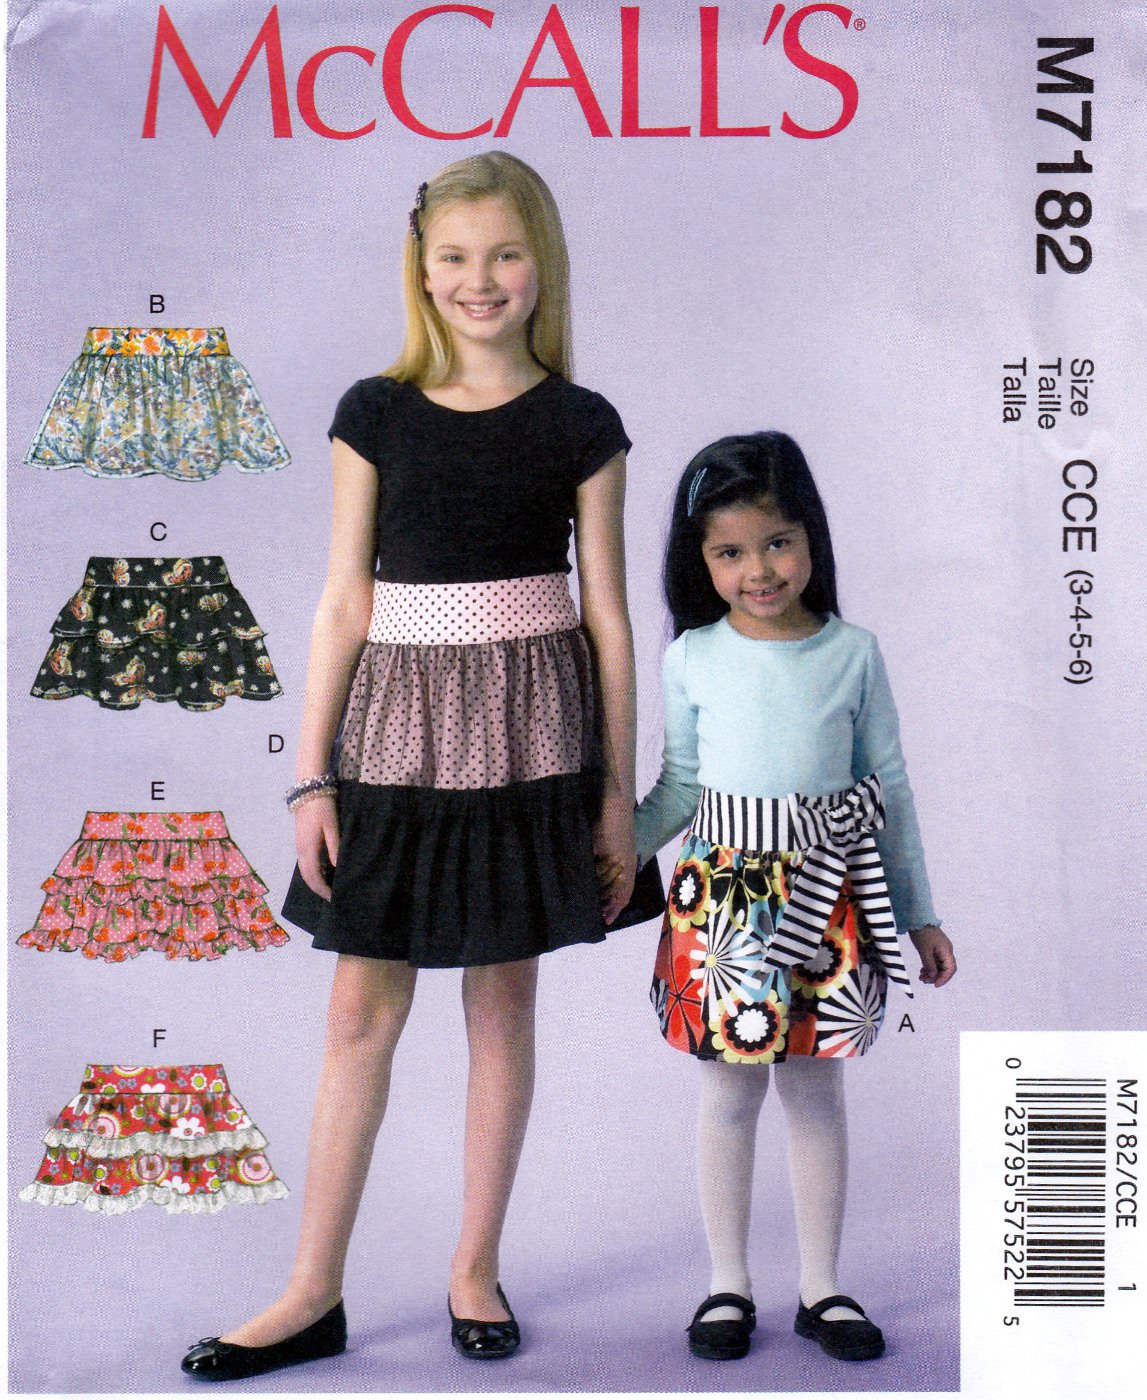 McCall's M7182 7182 Girls Skirts Sewing Pattern Childrens Kids Sizes 3-4-5-6 Ruffle Variations